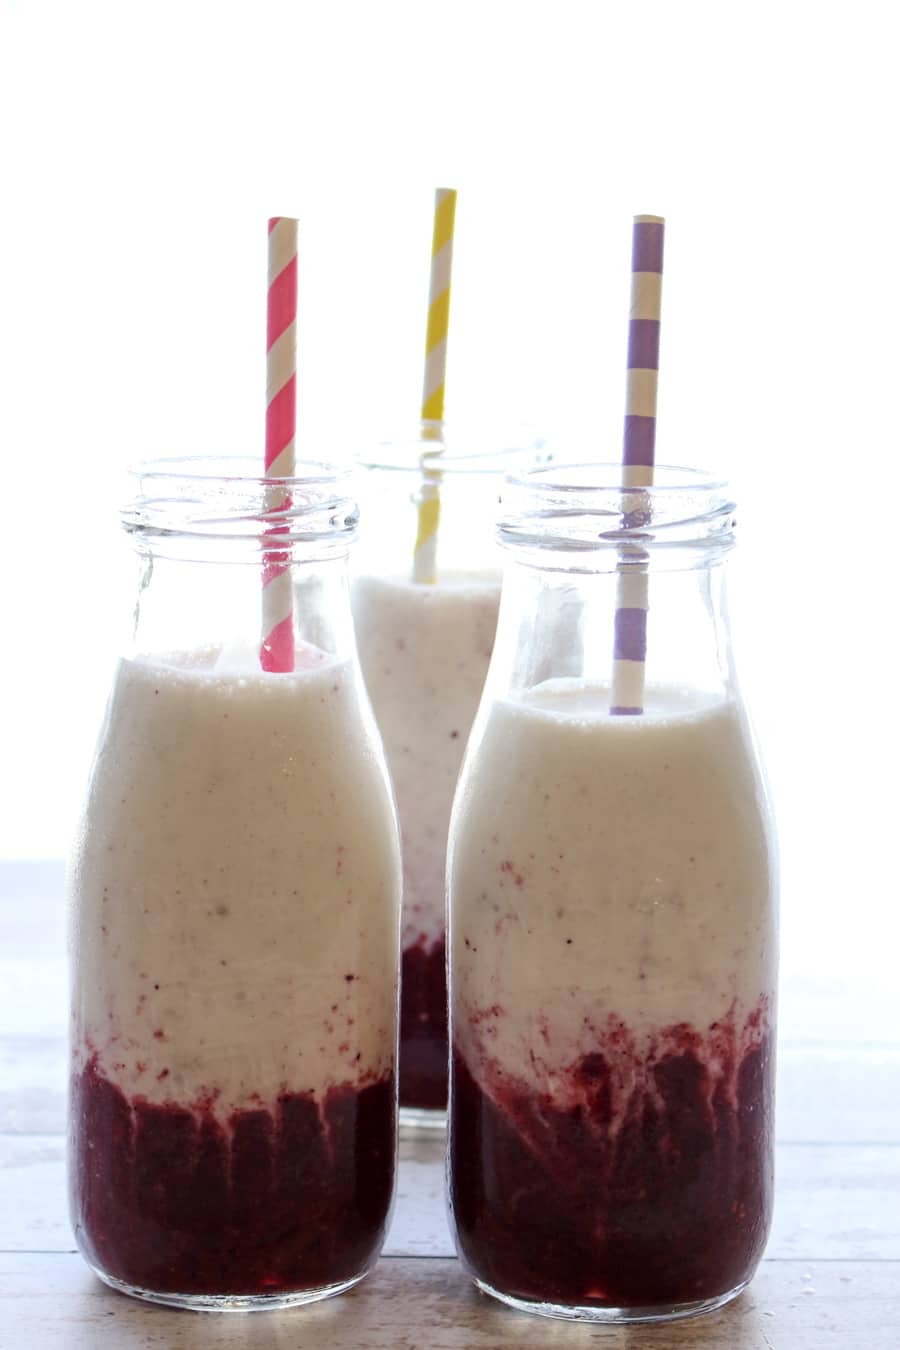 THREE BOTTLES OF BANANA BERRY YOGURT SMOOTHIES WITH COLORFUL STRAWS